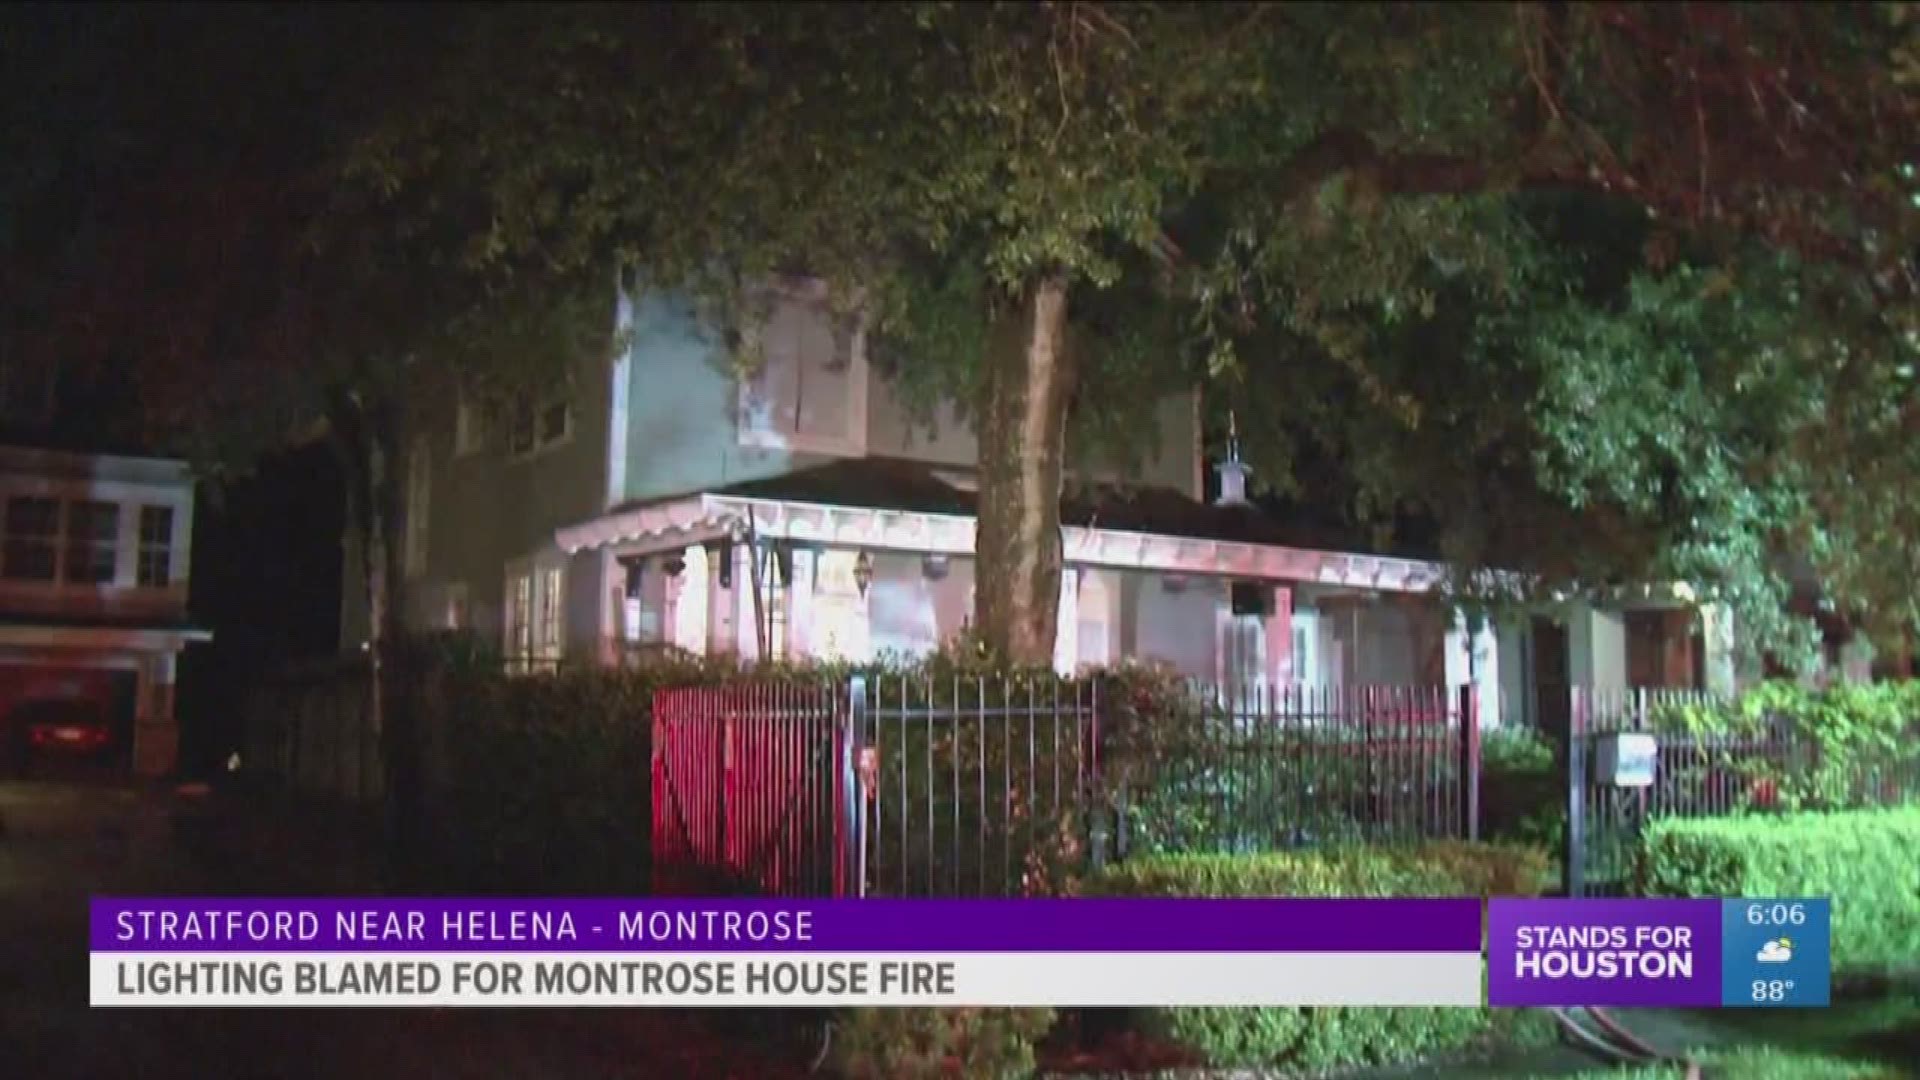 Firefighters say lightning is to blame for a fire that broke out in Montrose overnight. Four children were inside at the time with the nanny when they heard the noise and got out fast.